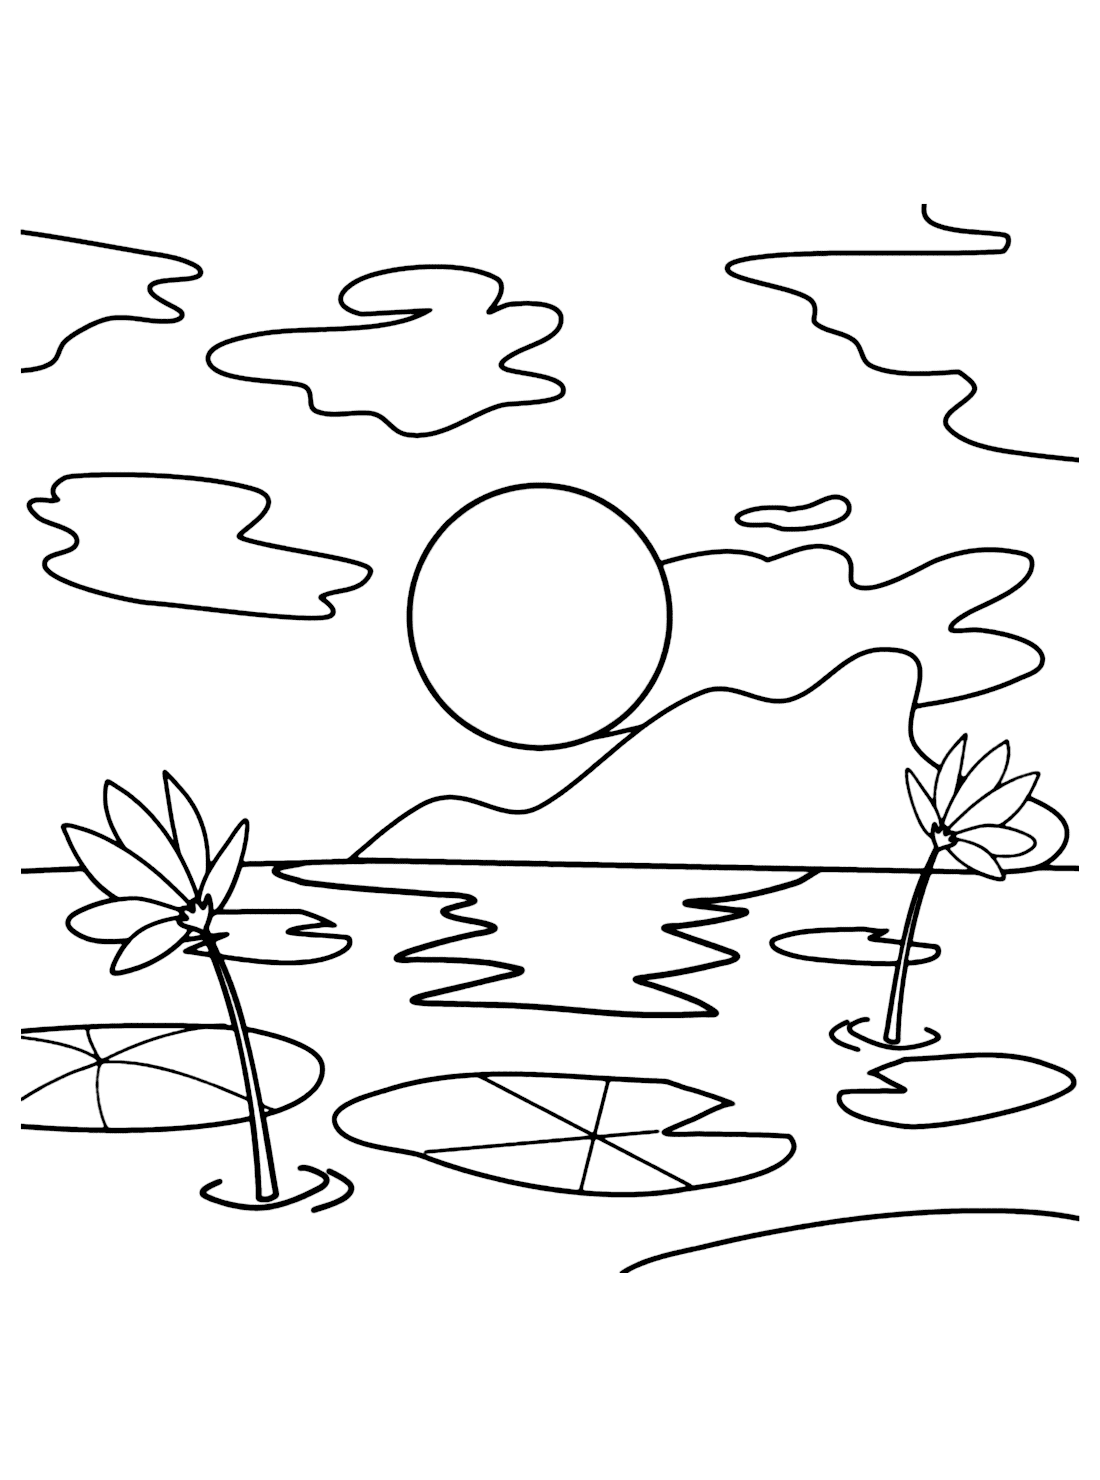 Lake with water lilies sky coloring pages